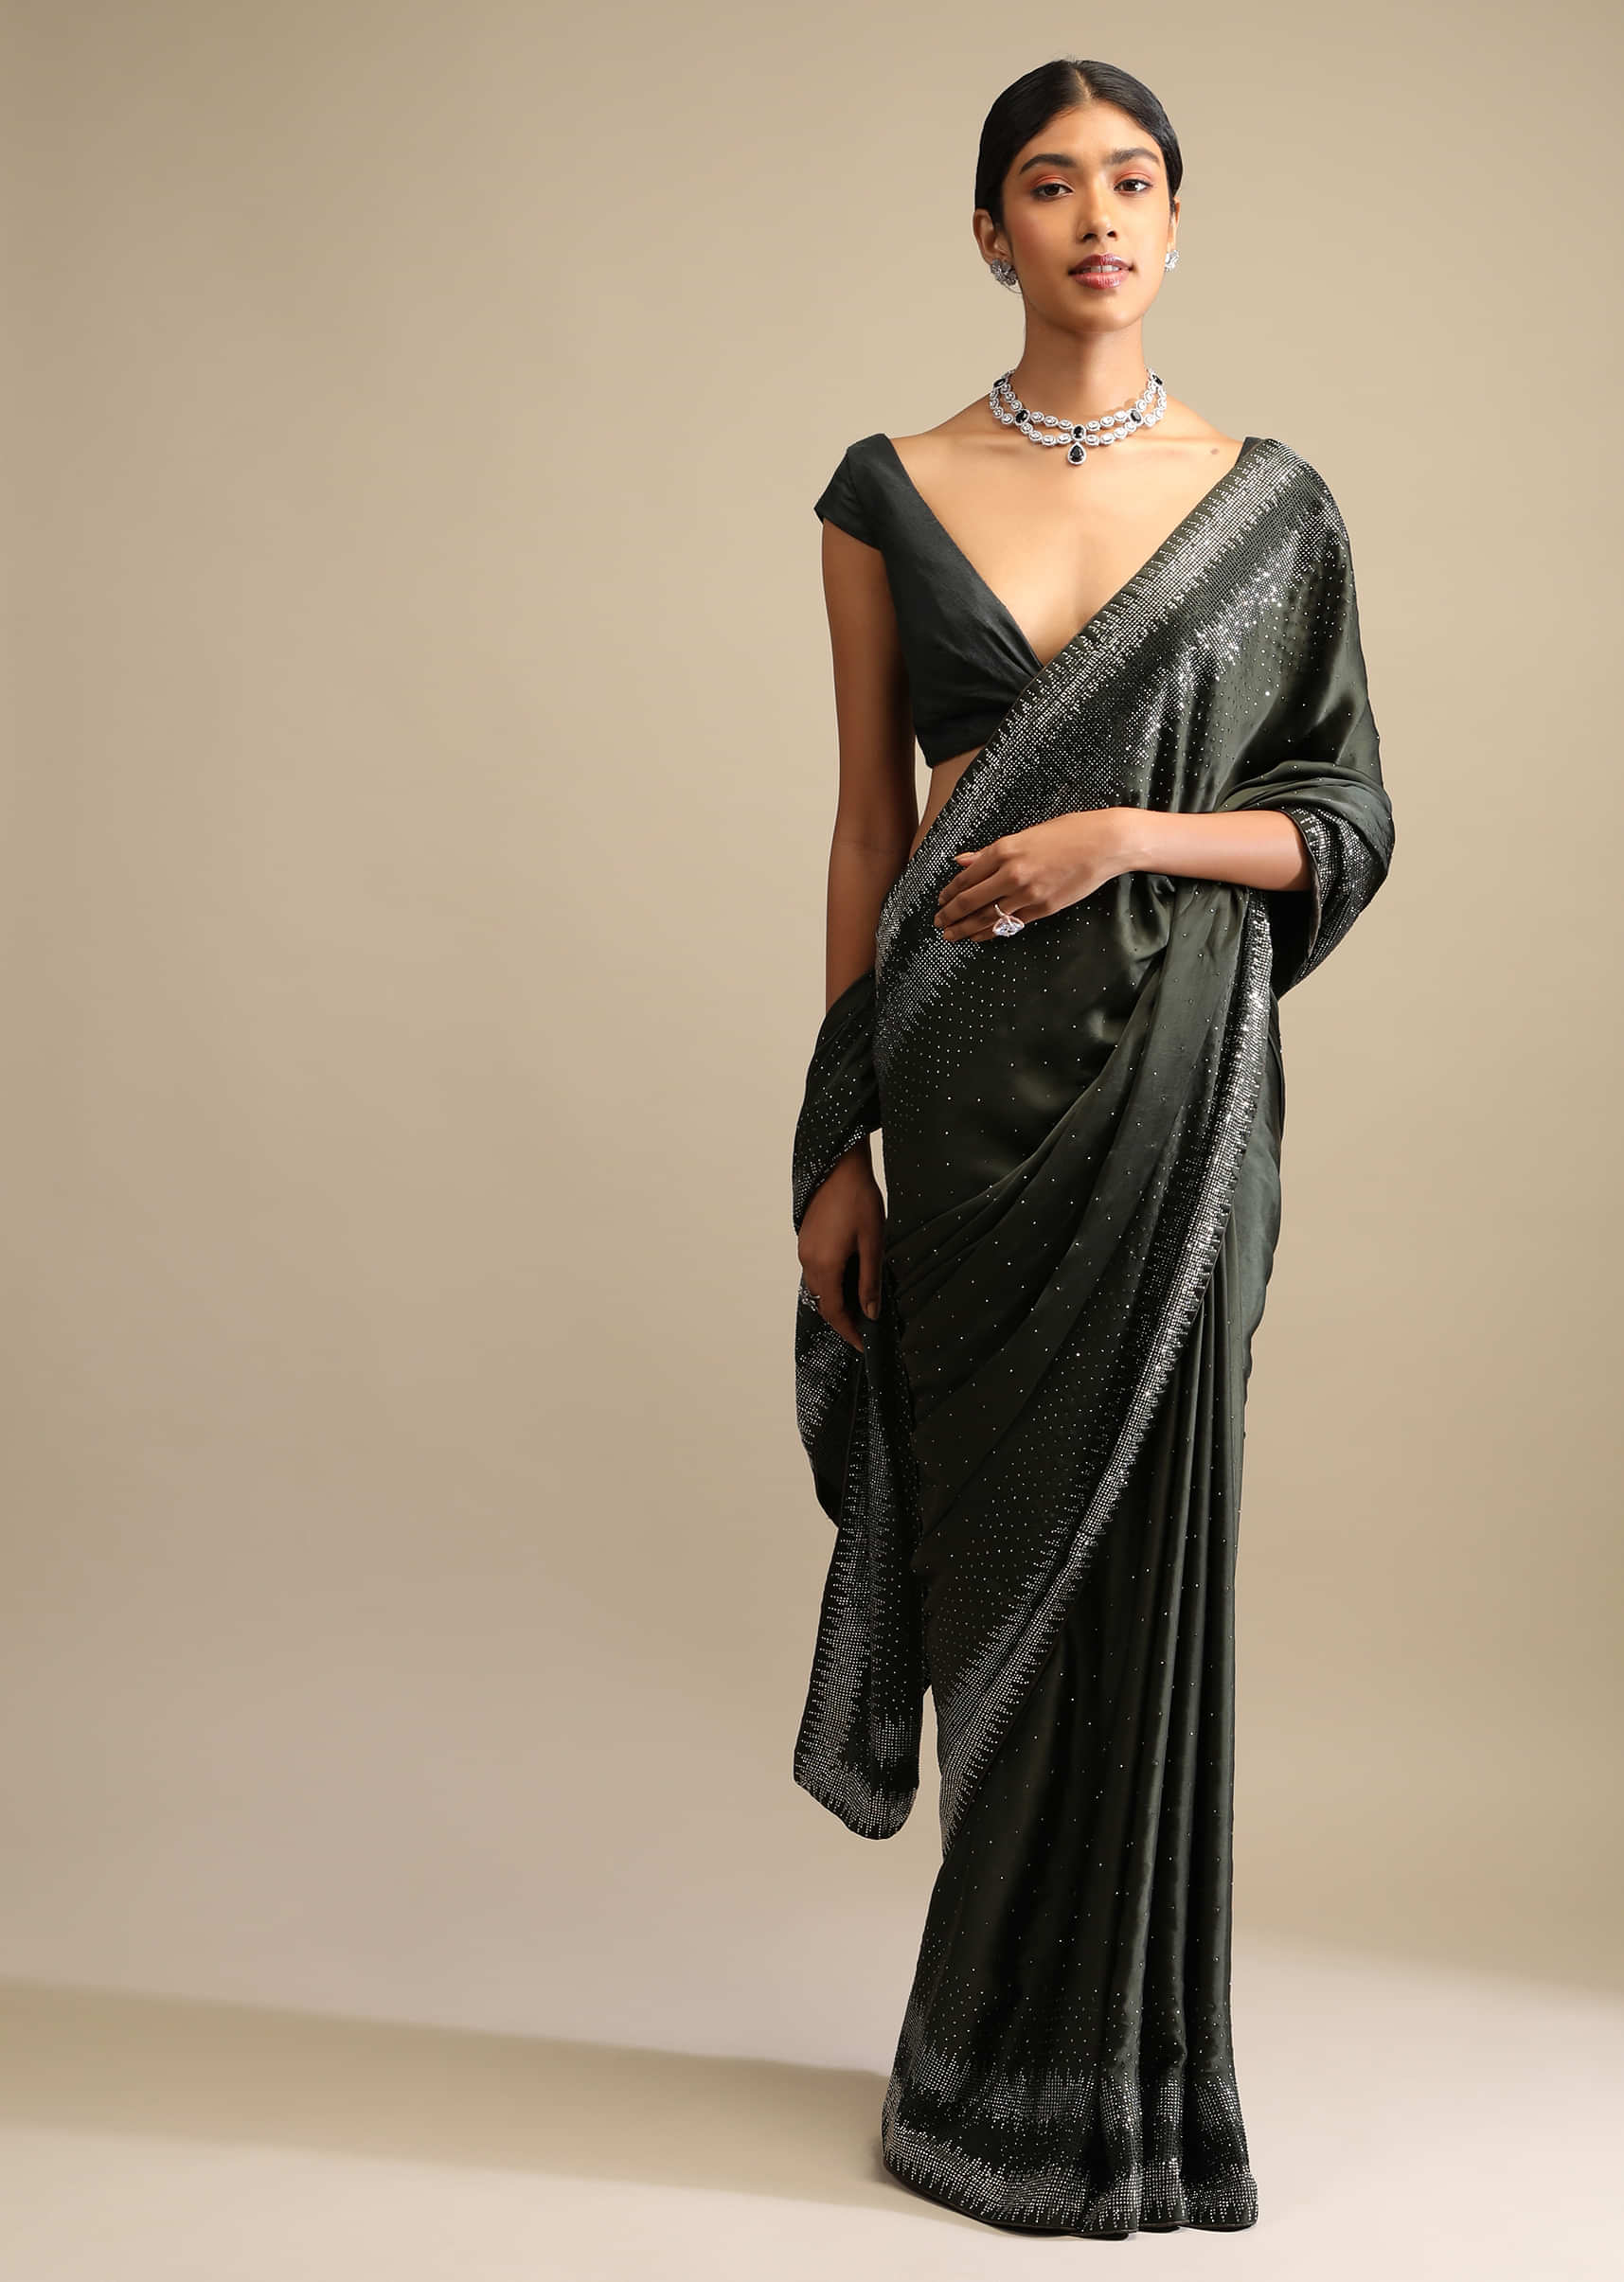 Shadow Green Saree In Satin With Scattered Sequins And Heavy Embellished Border  